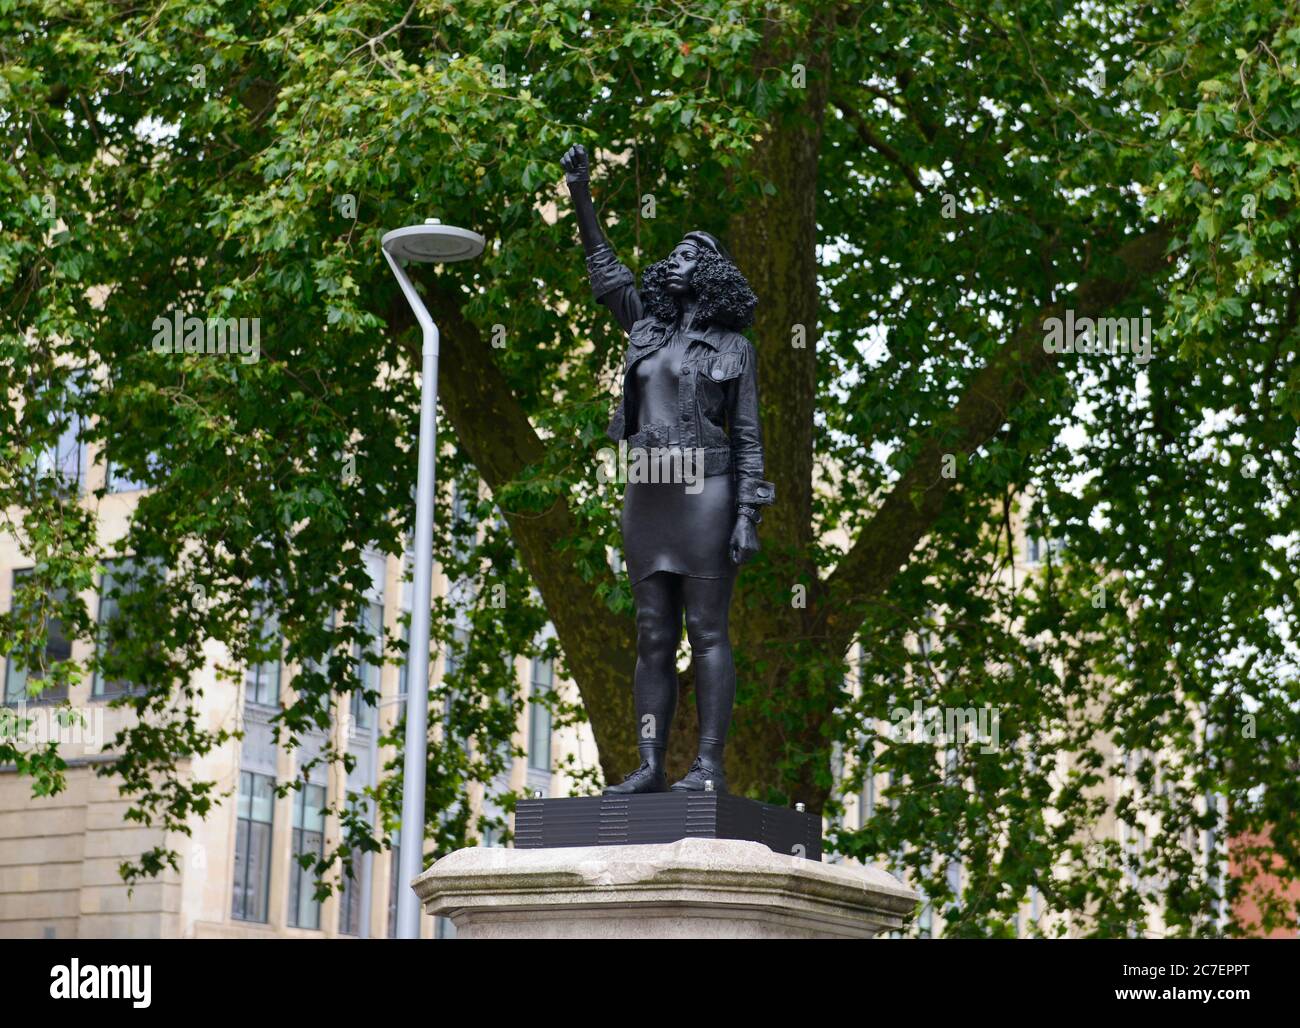 The 'A Surge of Power (Jen Reid)' statue stands on the plinth occupied by Edward Colston's statue since 1895 in Bristol, UK, for just one day in July. Stock Photo